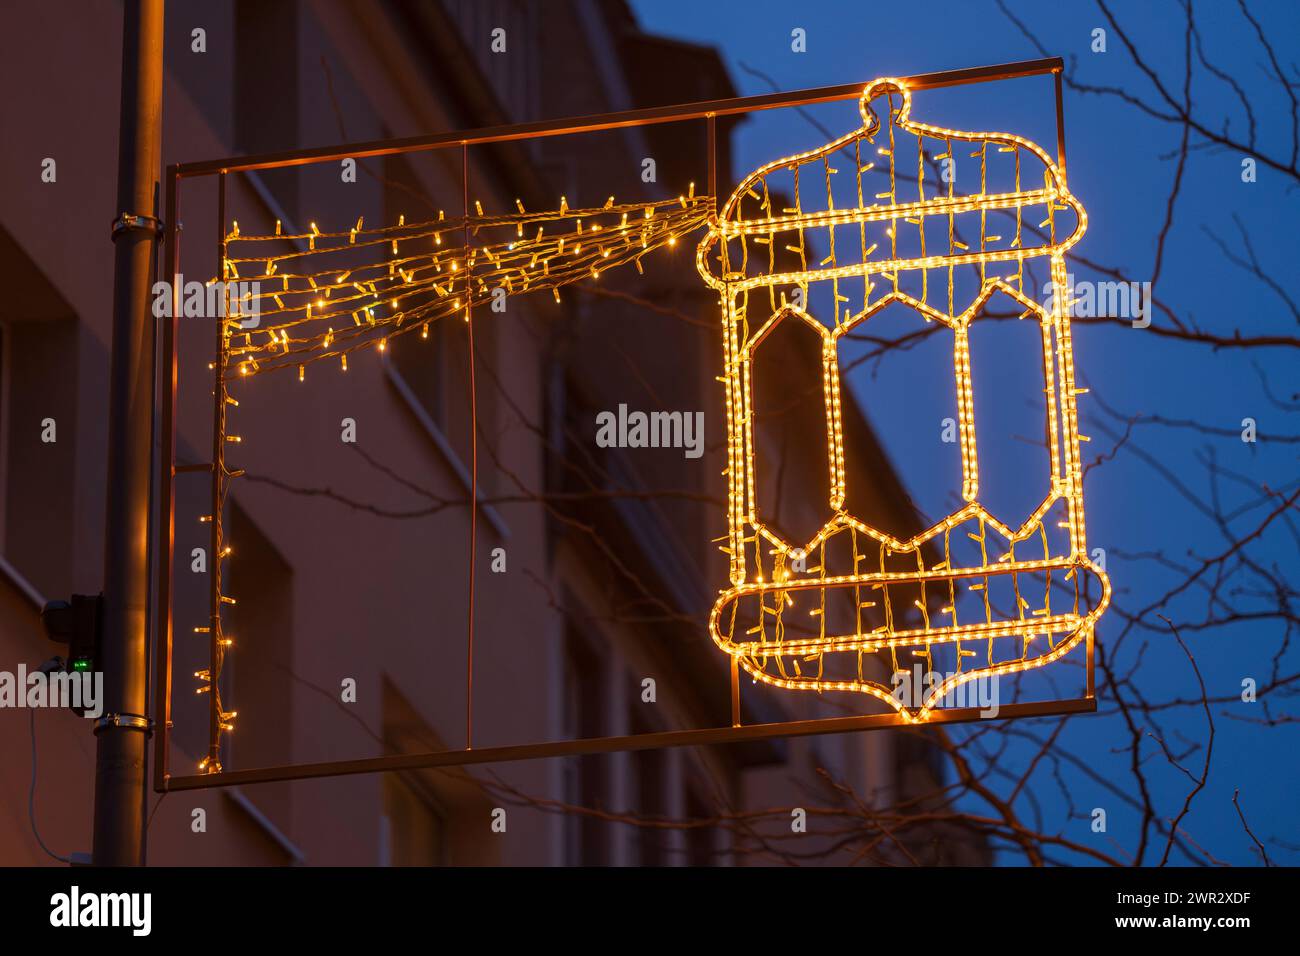 This year, for the first time in Cologne, there will be special lighting for Ramadan. Stock Photo